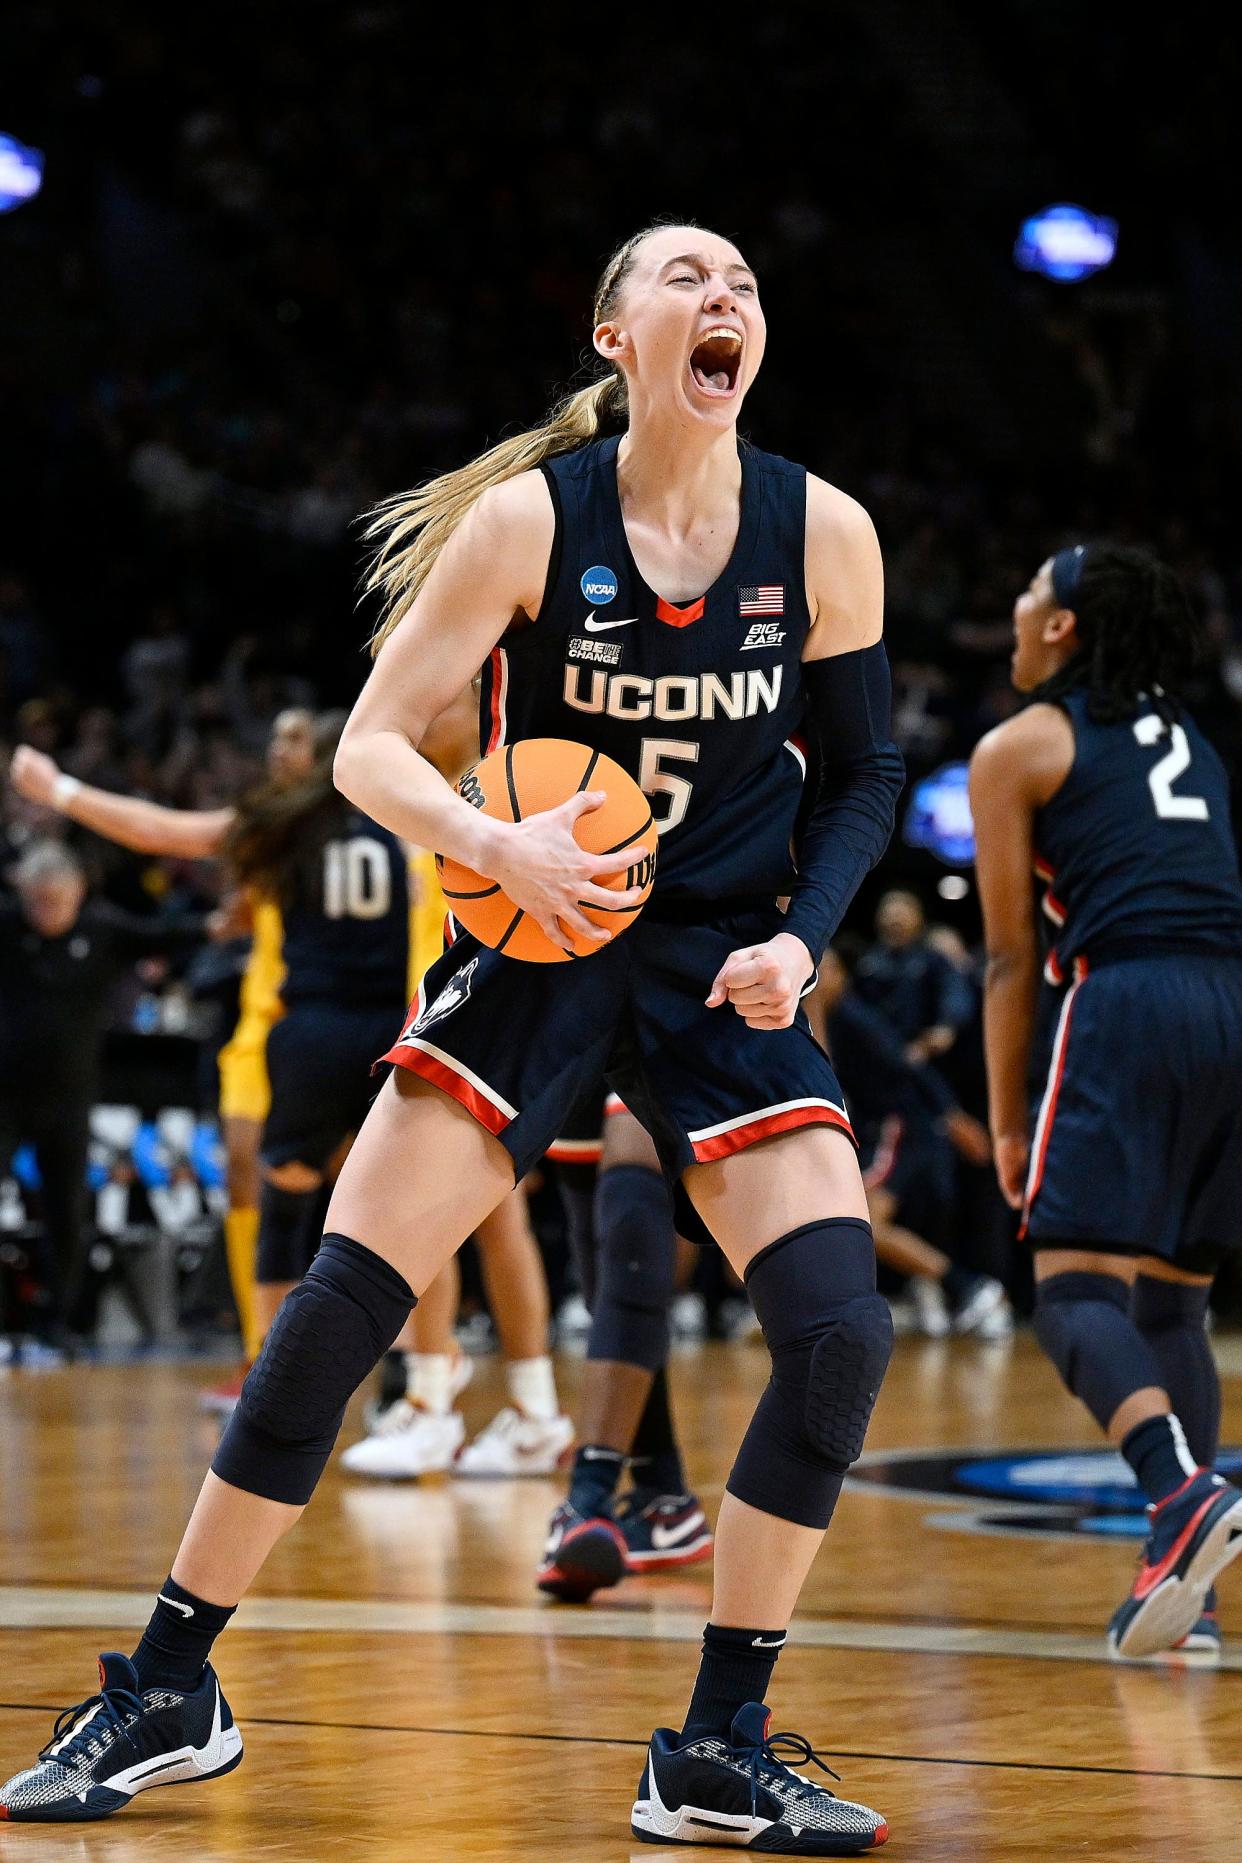 UConn's Paige Bueckers celebrates after the Huskies defeated USC in the finals of the Portland Regional of the NCAA Tournament on Tuesday.